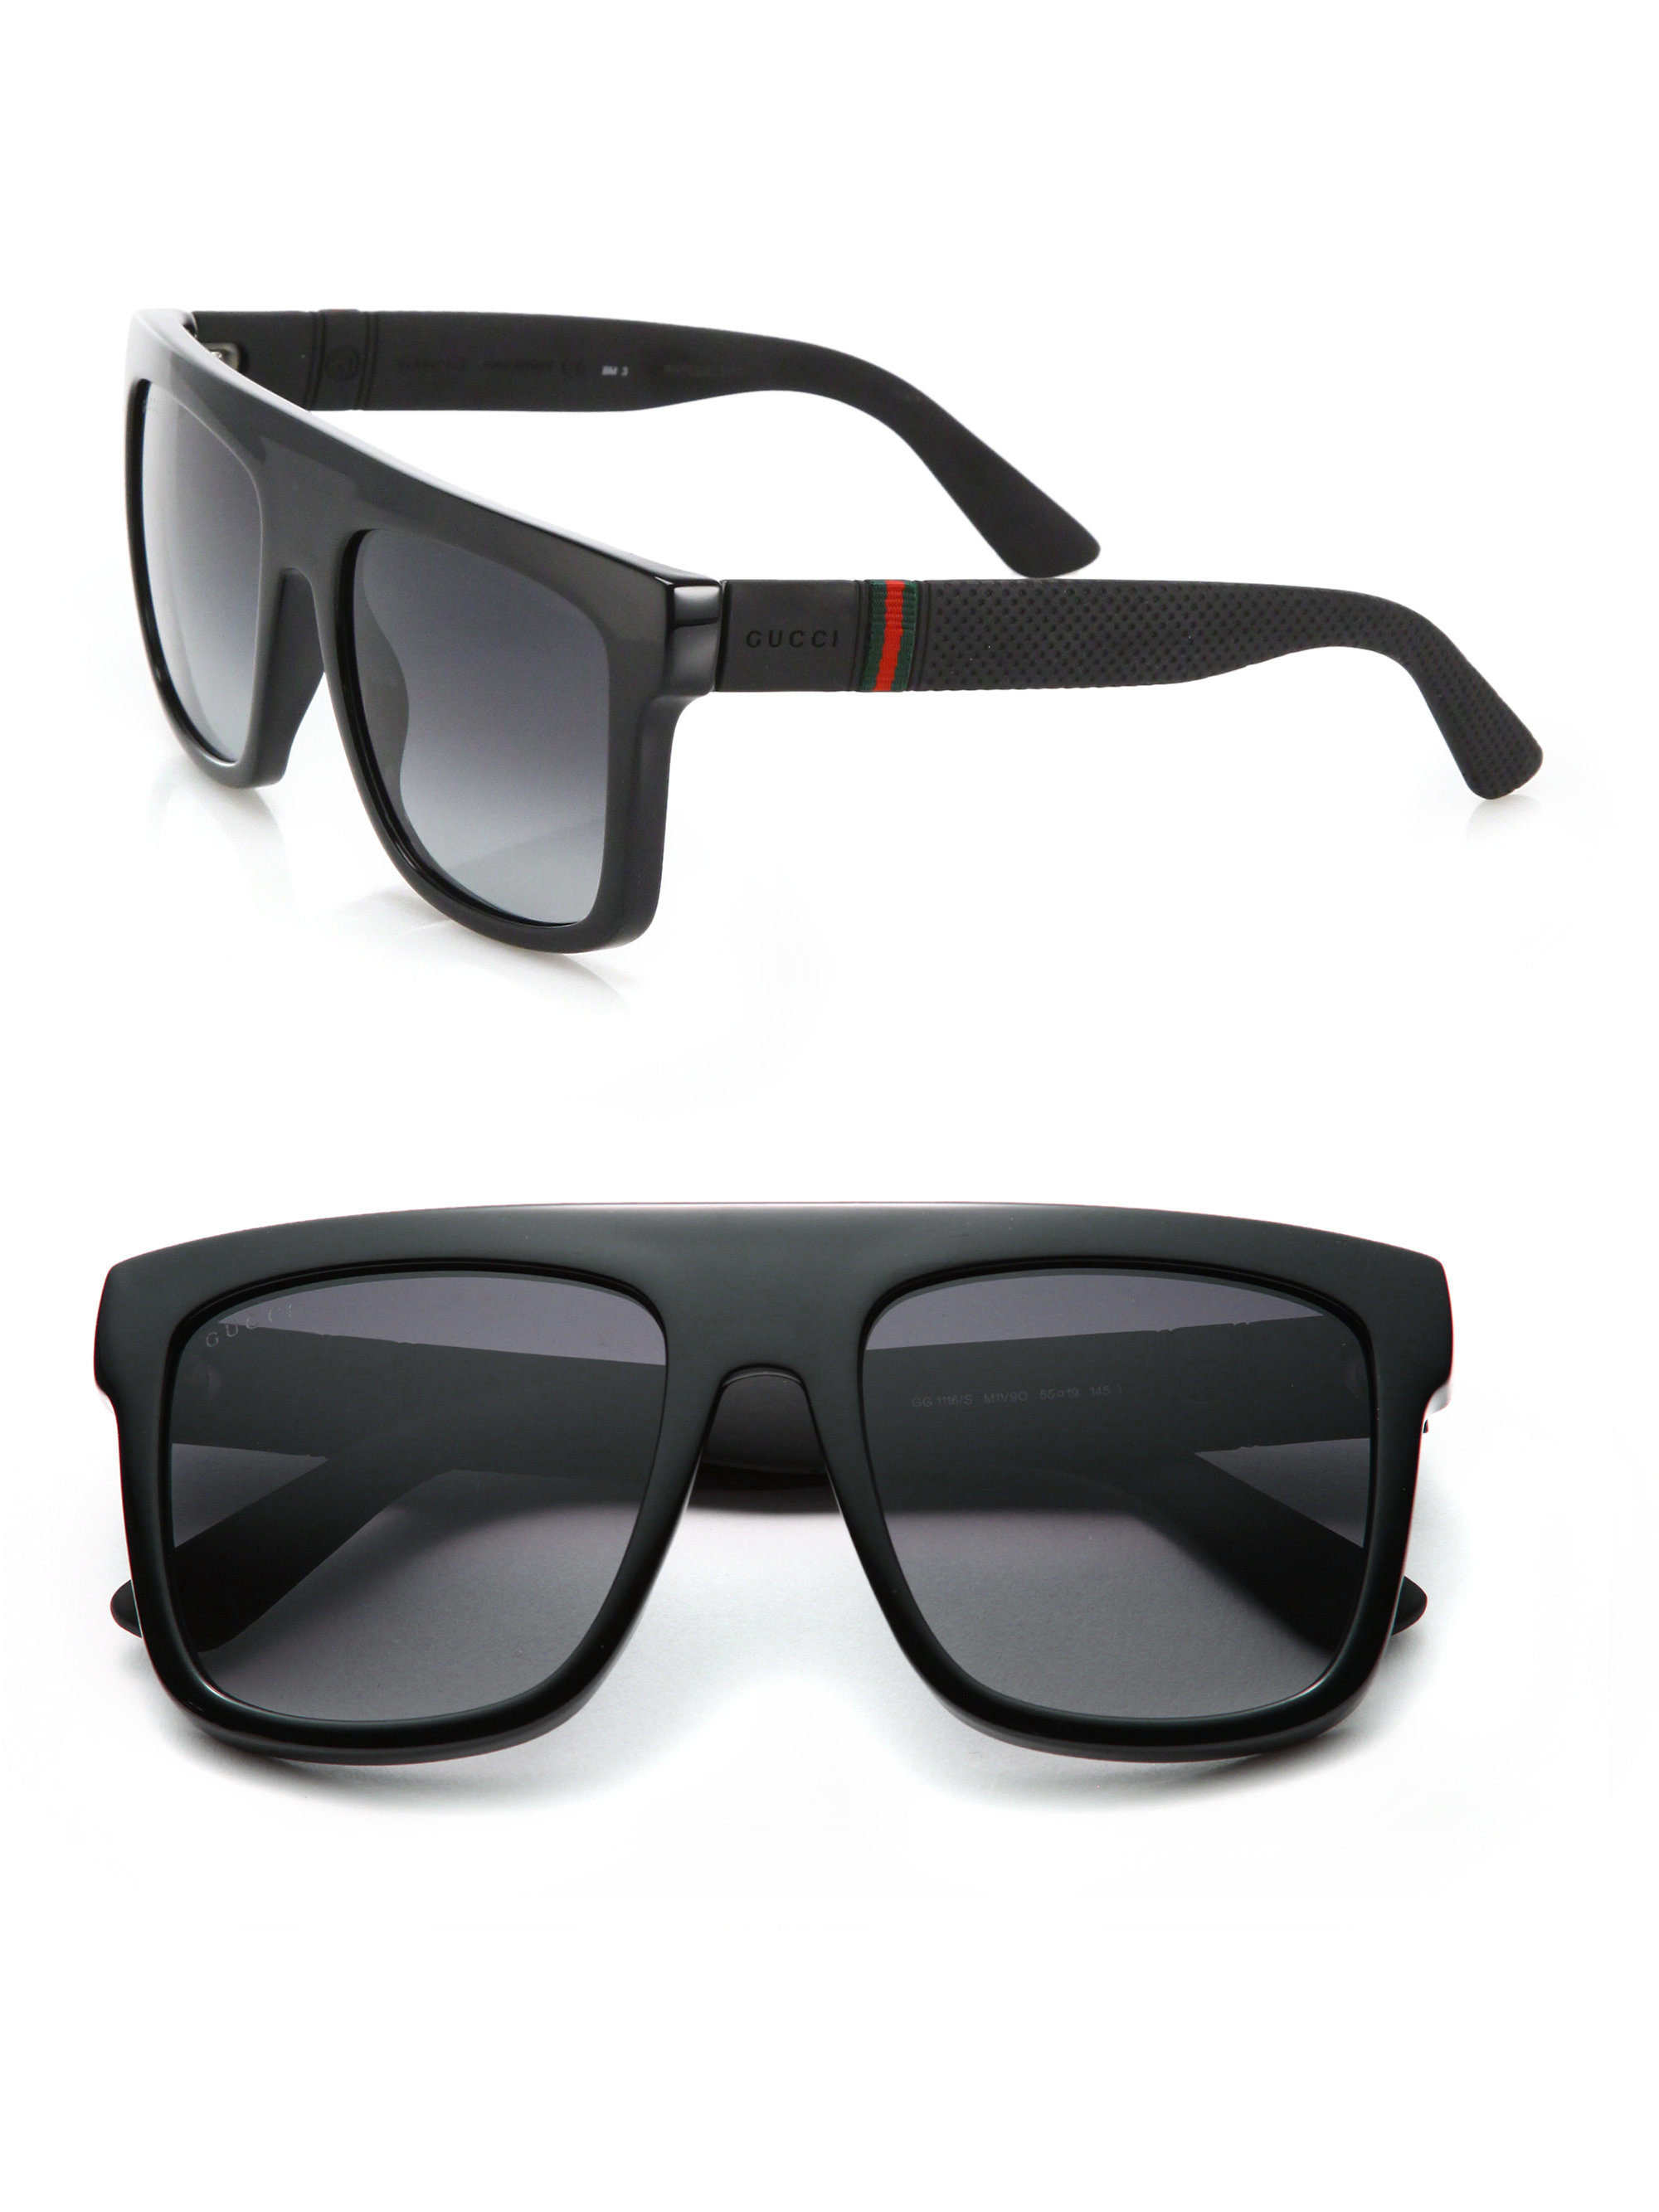 Lyst - Gucci 55mm Flat-top Injected Sunglasses in Black for Men